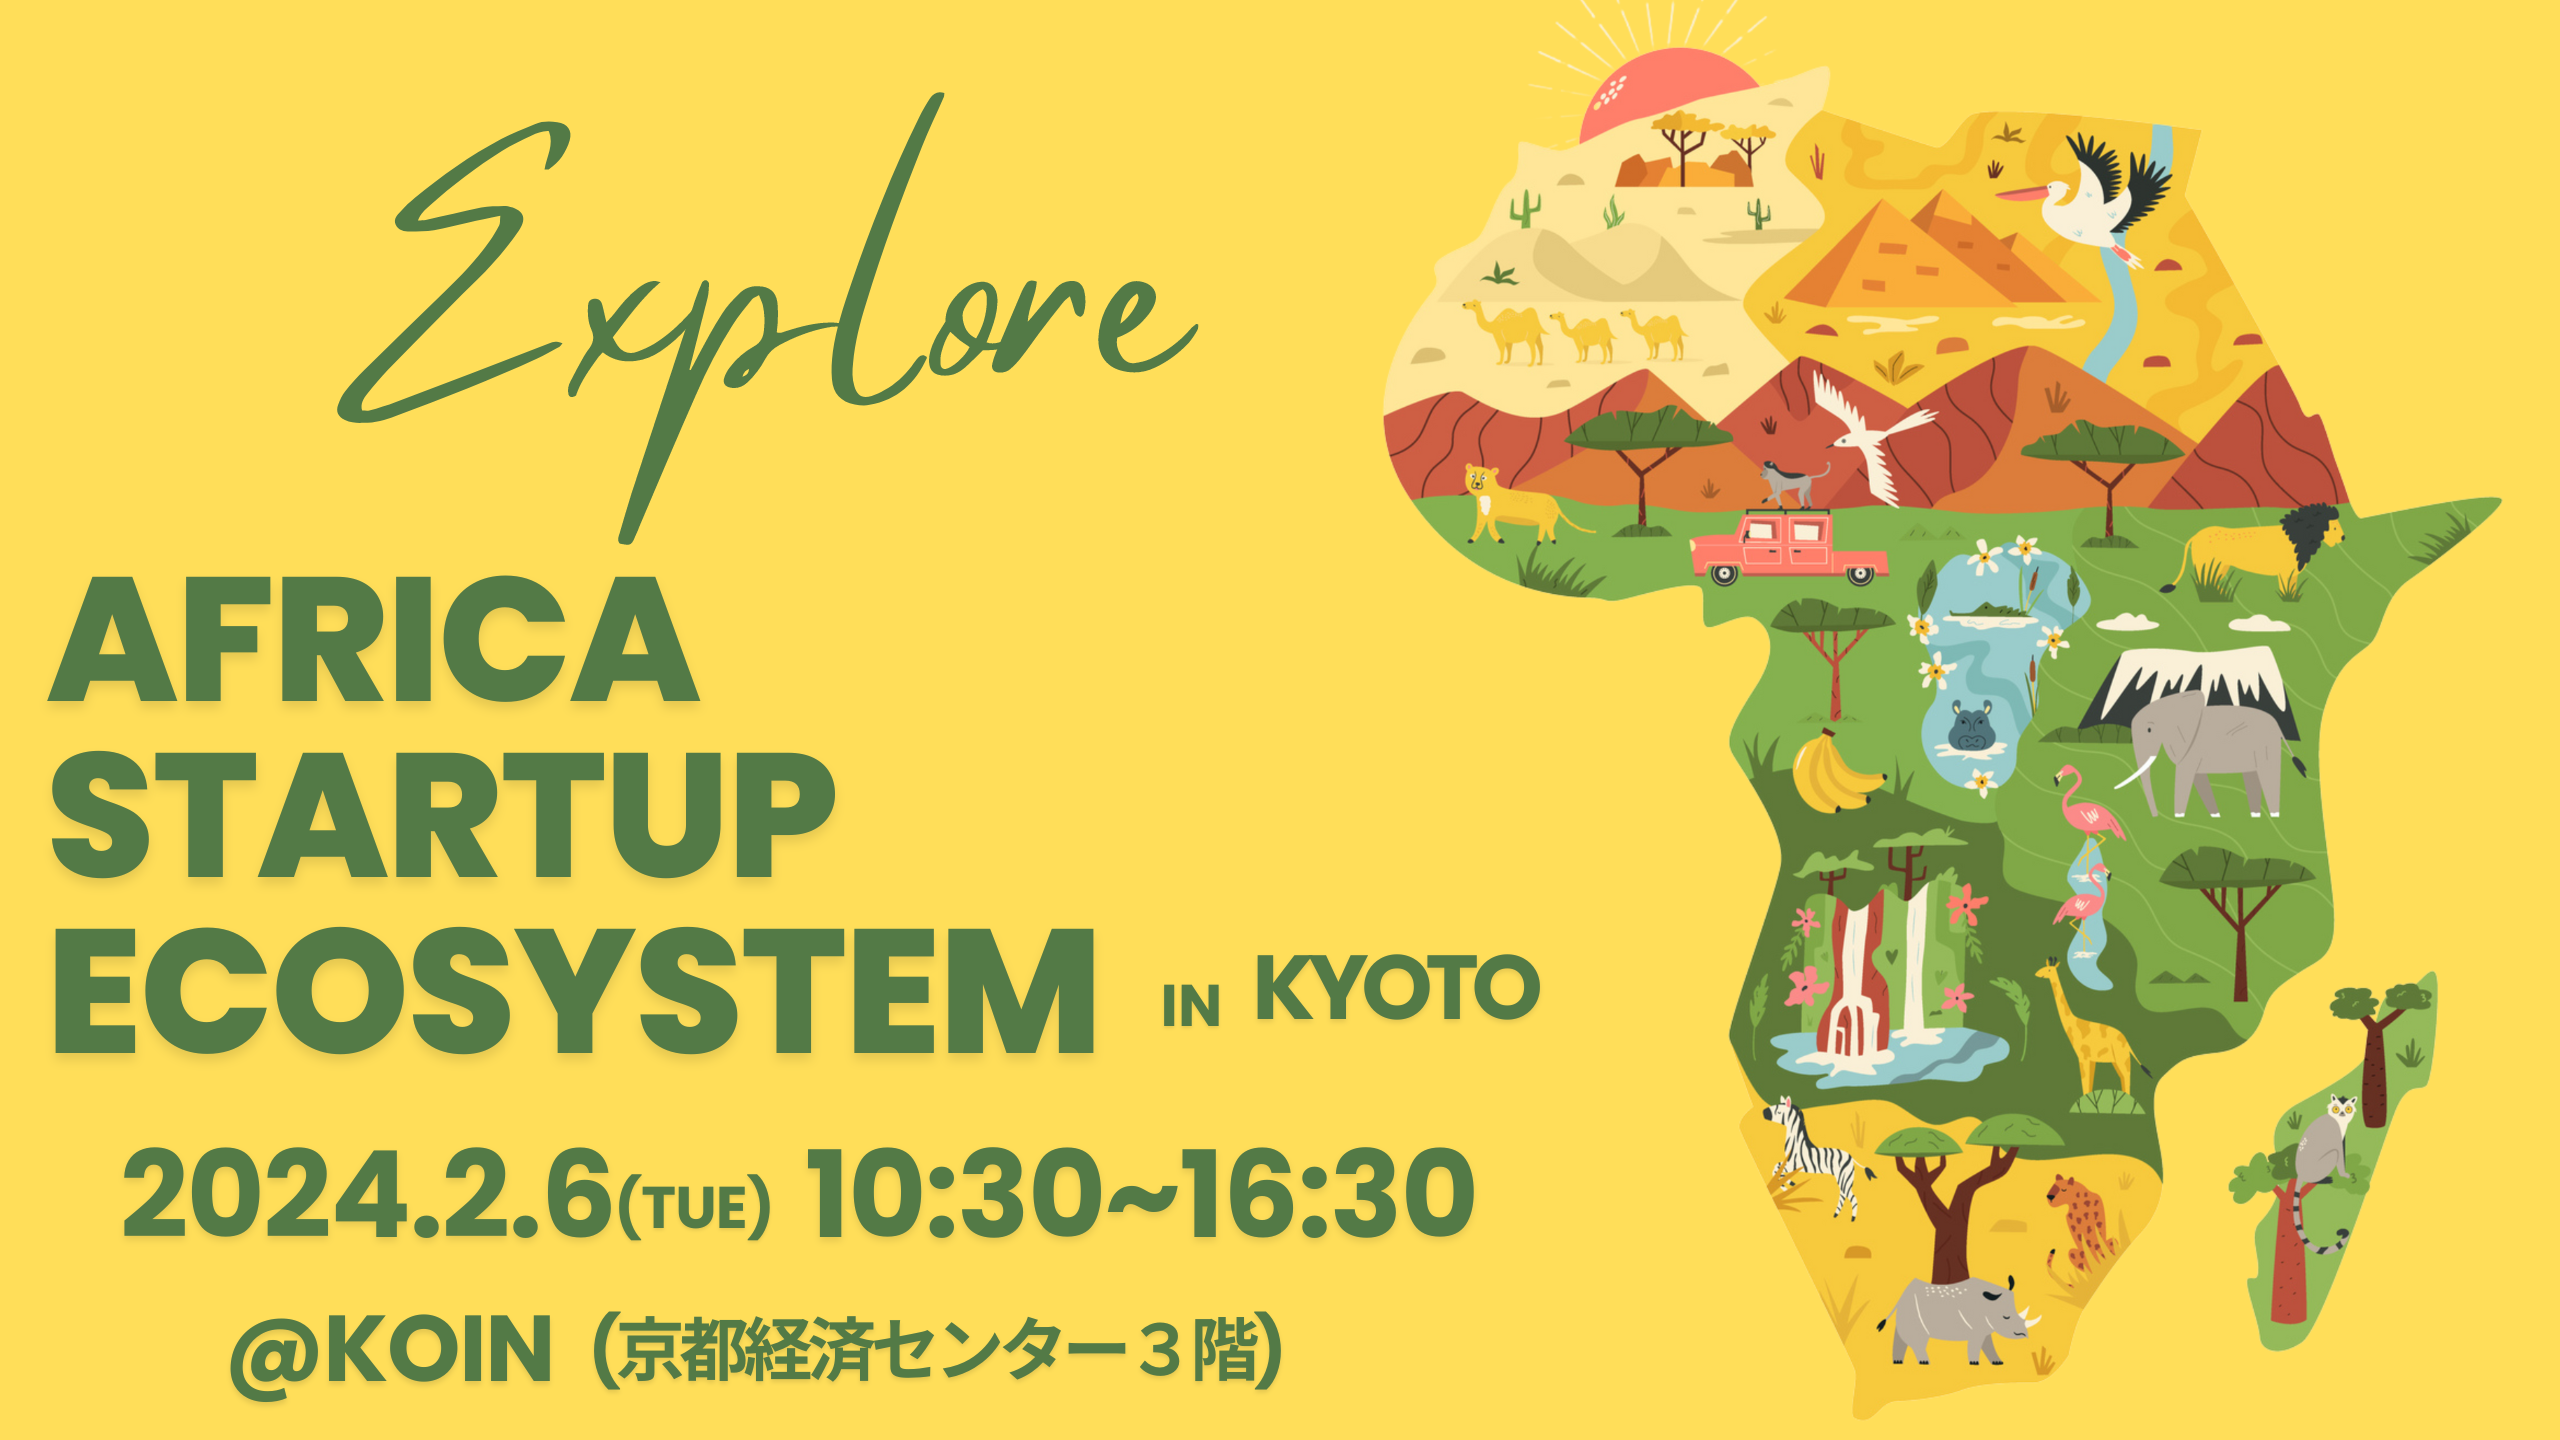 Explore Africa Startup Ecosystem in Kyoto